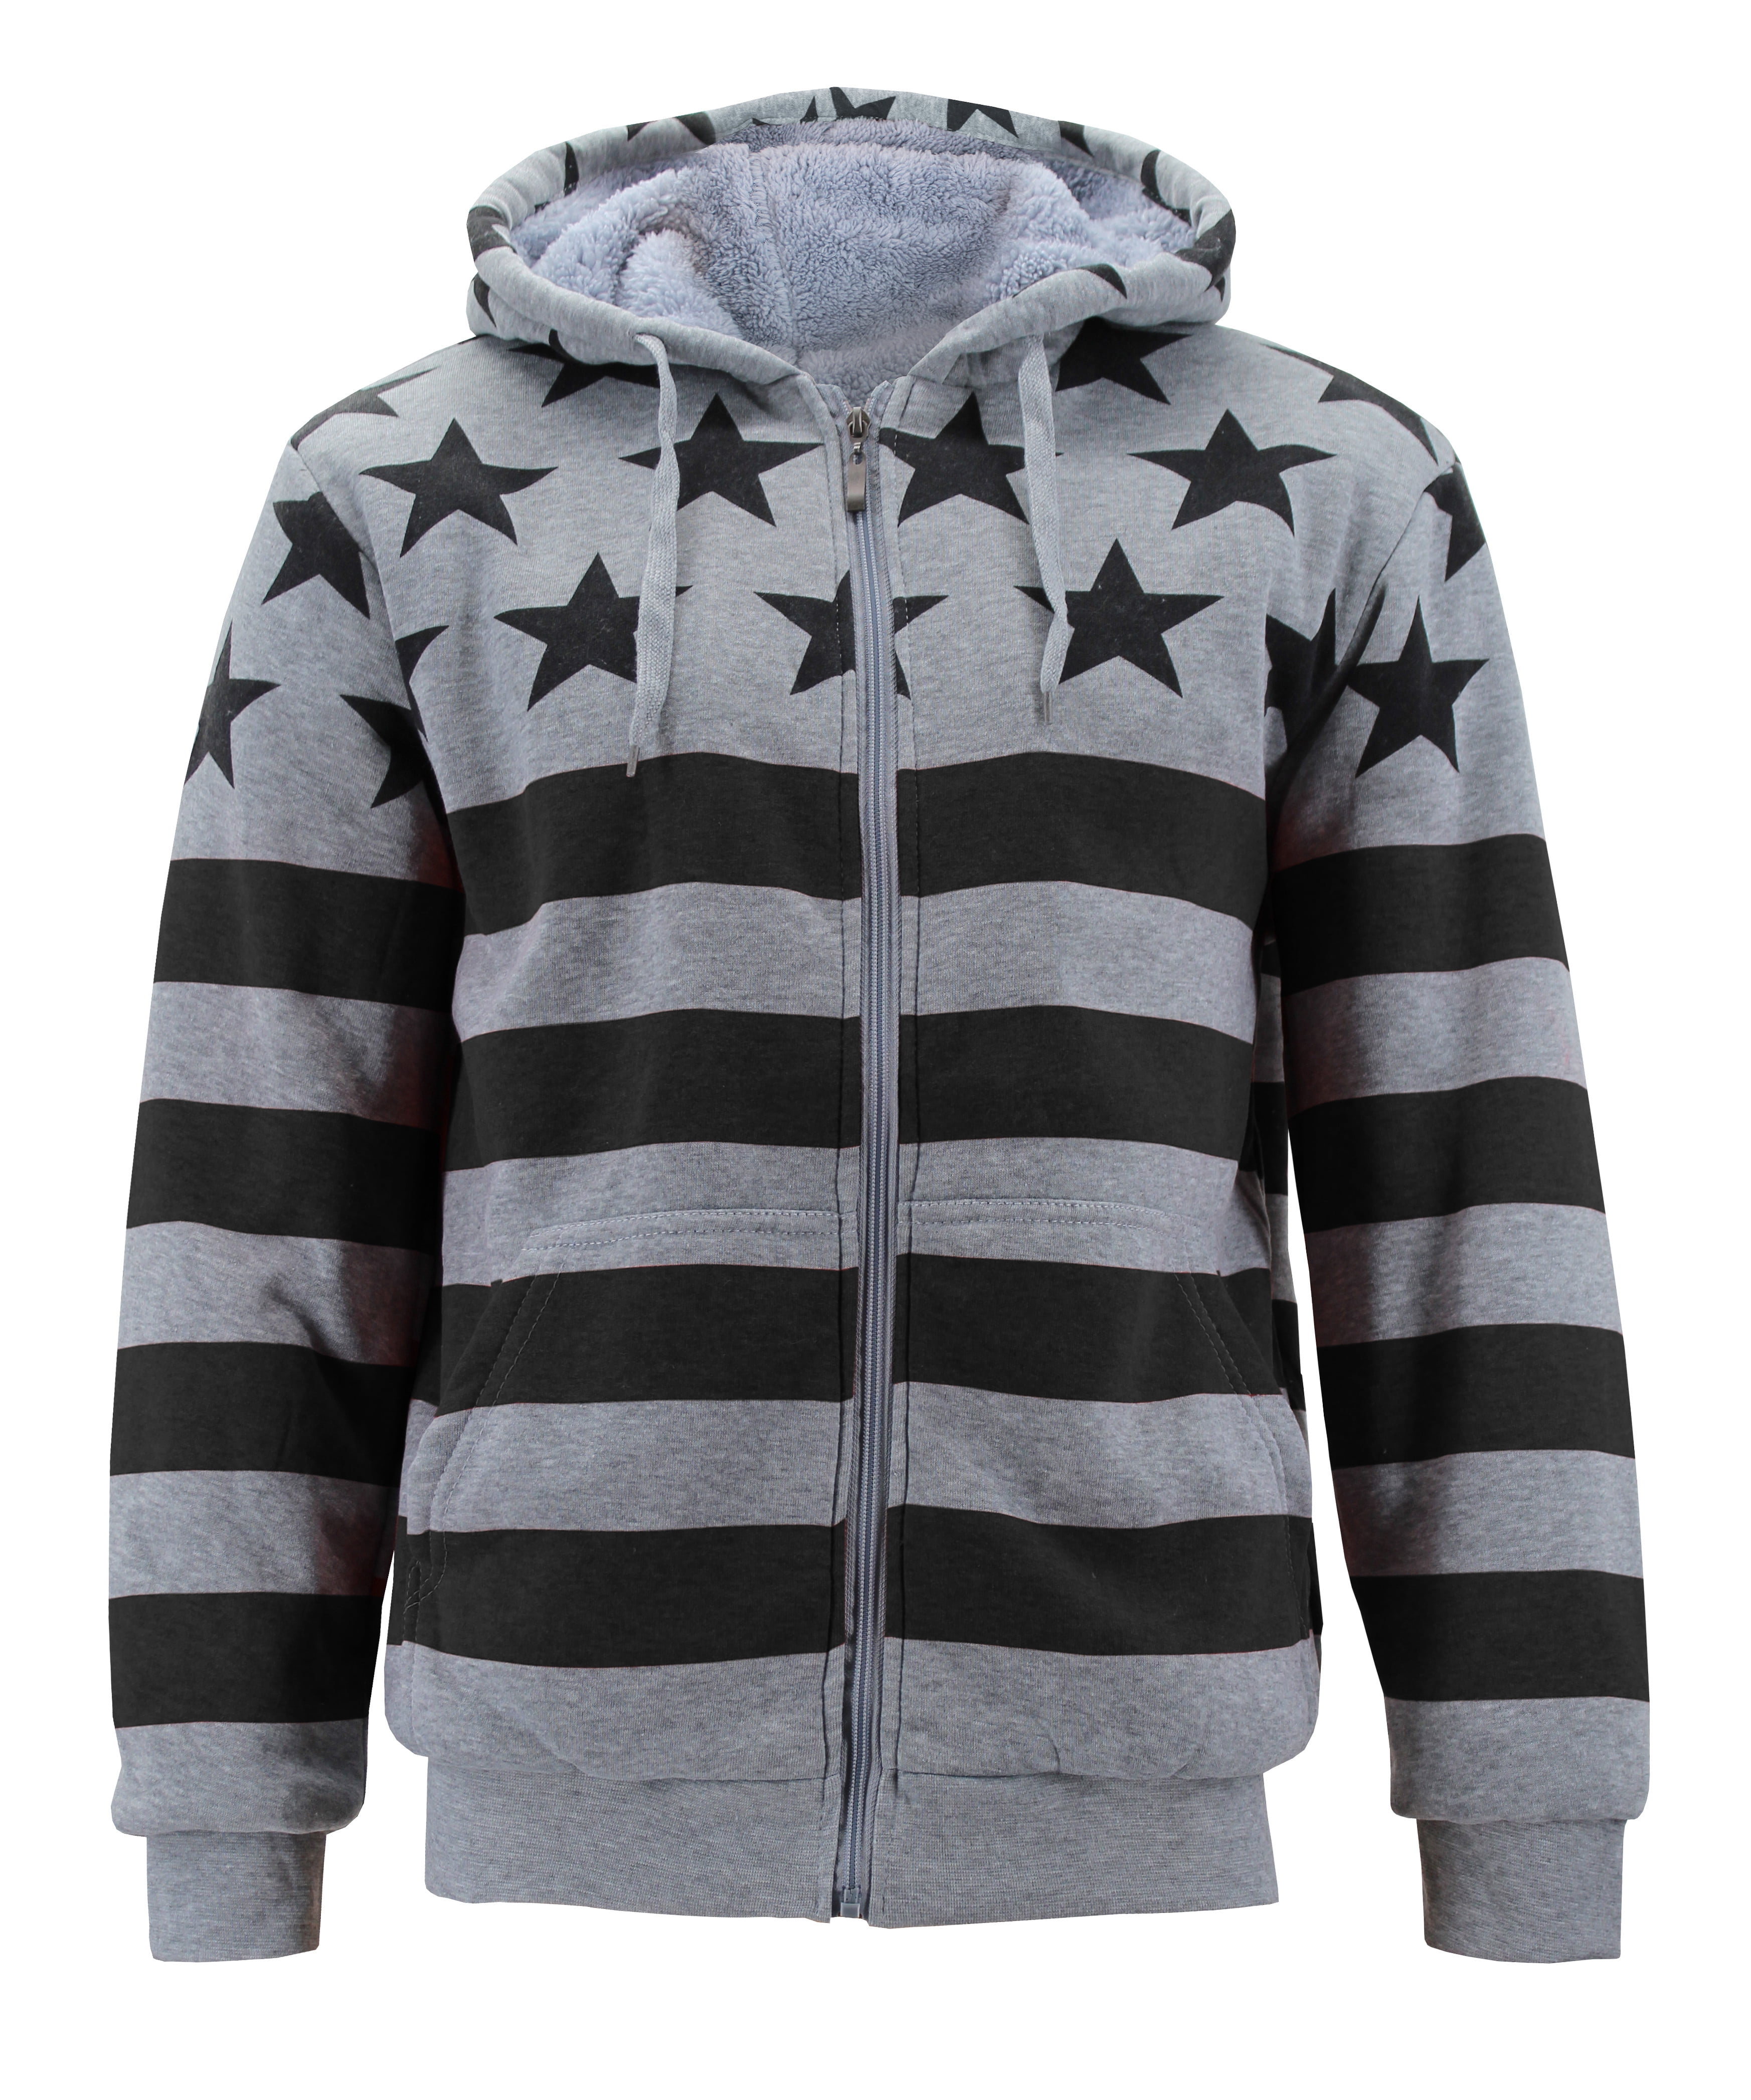 Men's USA Flag Athletic Soft Sherpa Lined Fleece Zip Up Hoodie